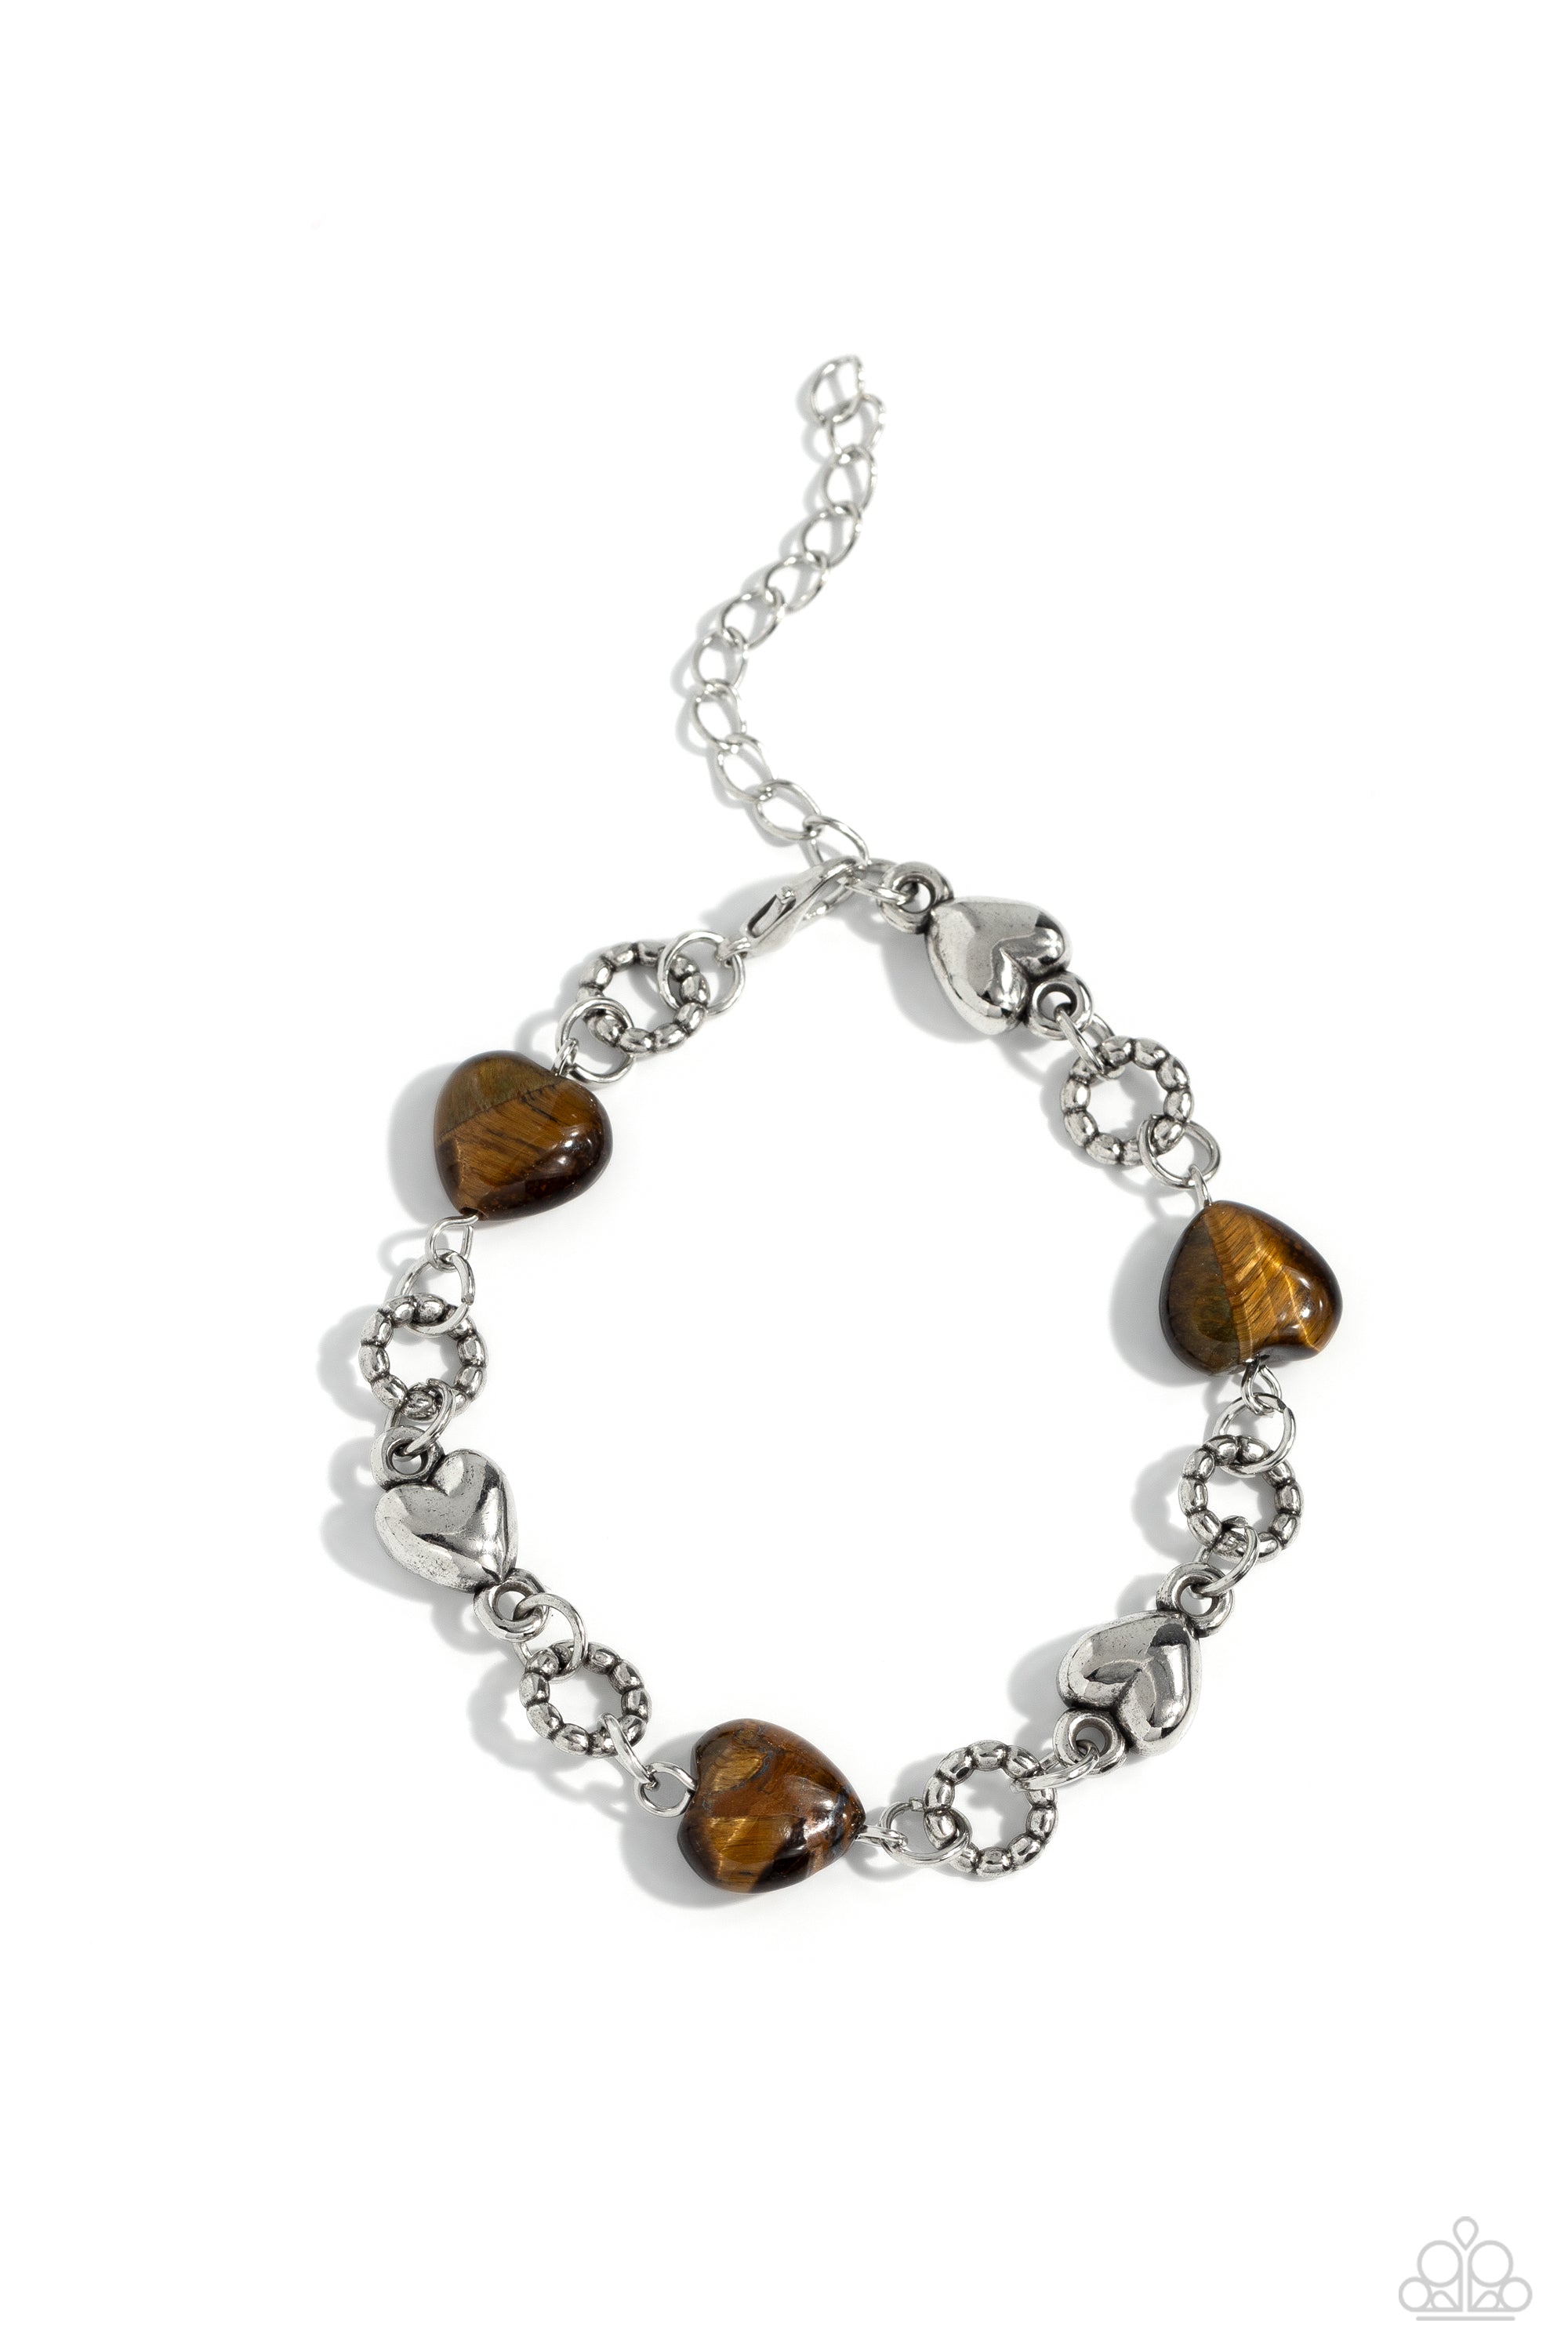 I Can Feel Your Heartbeat Brown Tiger's Eye Stone Bracelet - Paparazzi Accessories- lightbox - CarasShop.com - $5 Jewelry by Cara Jewels